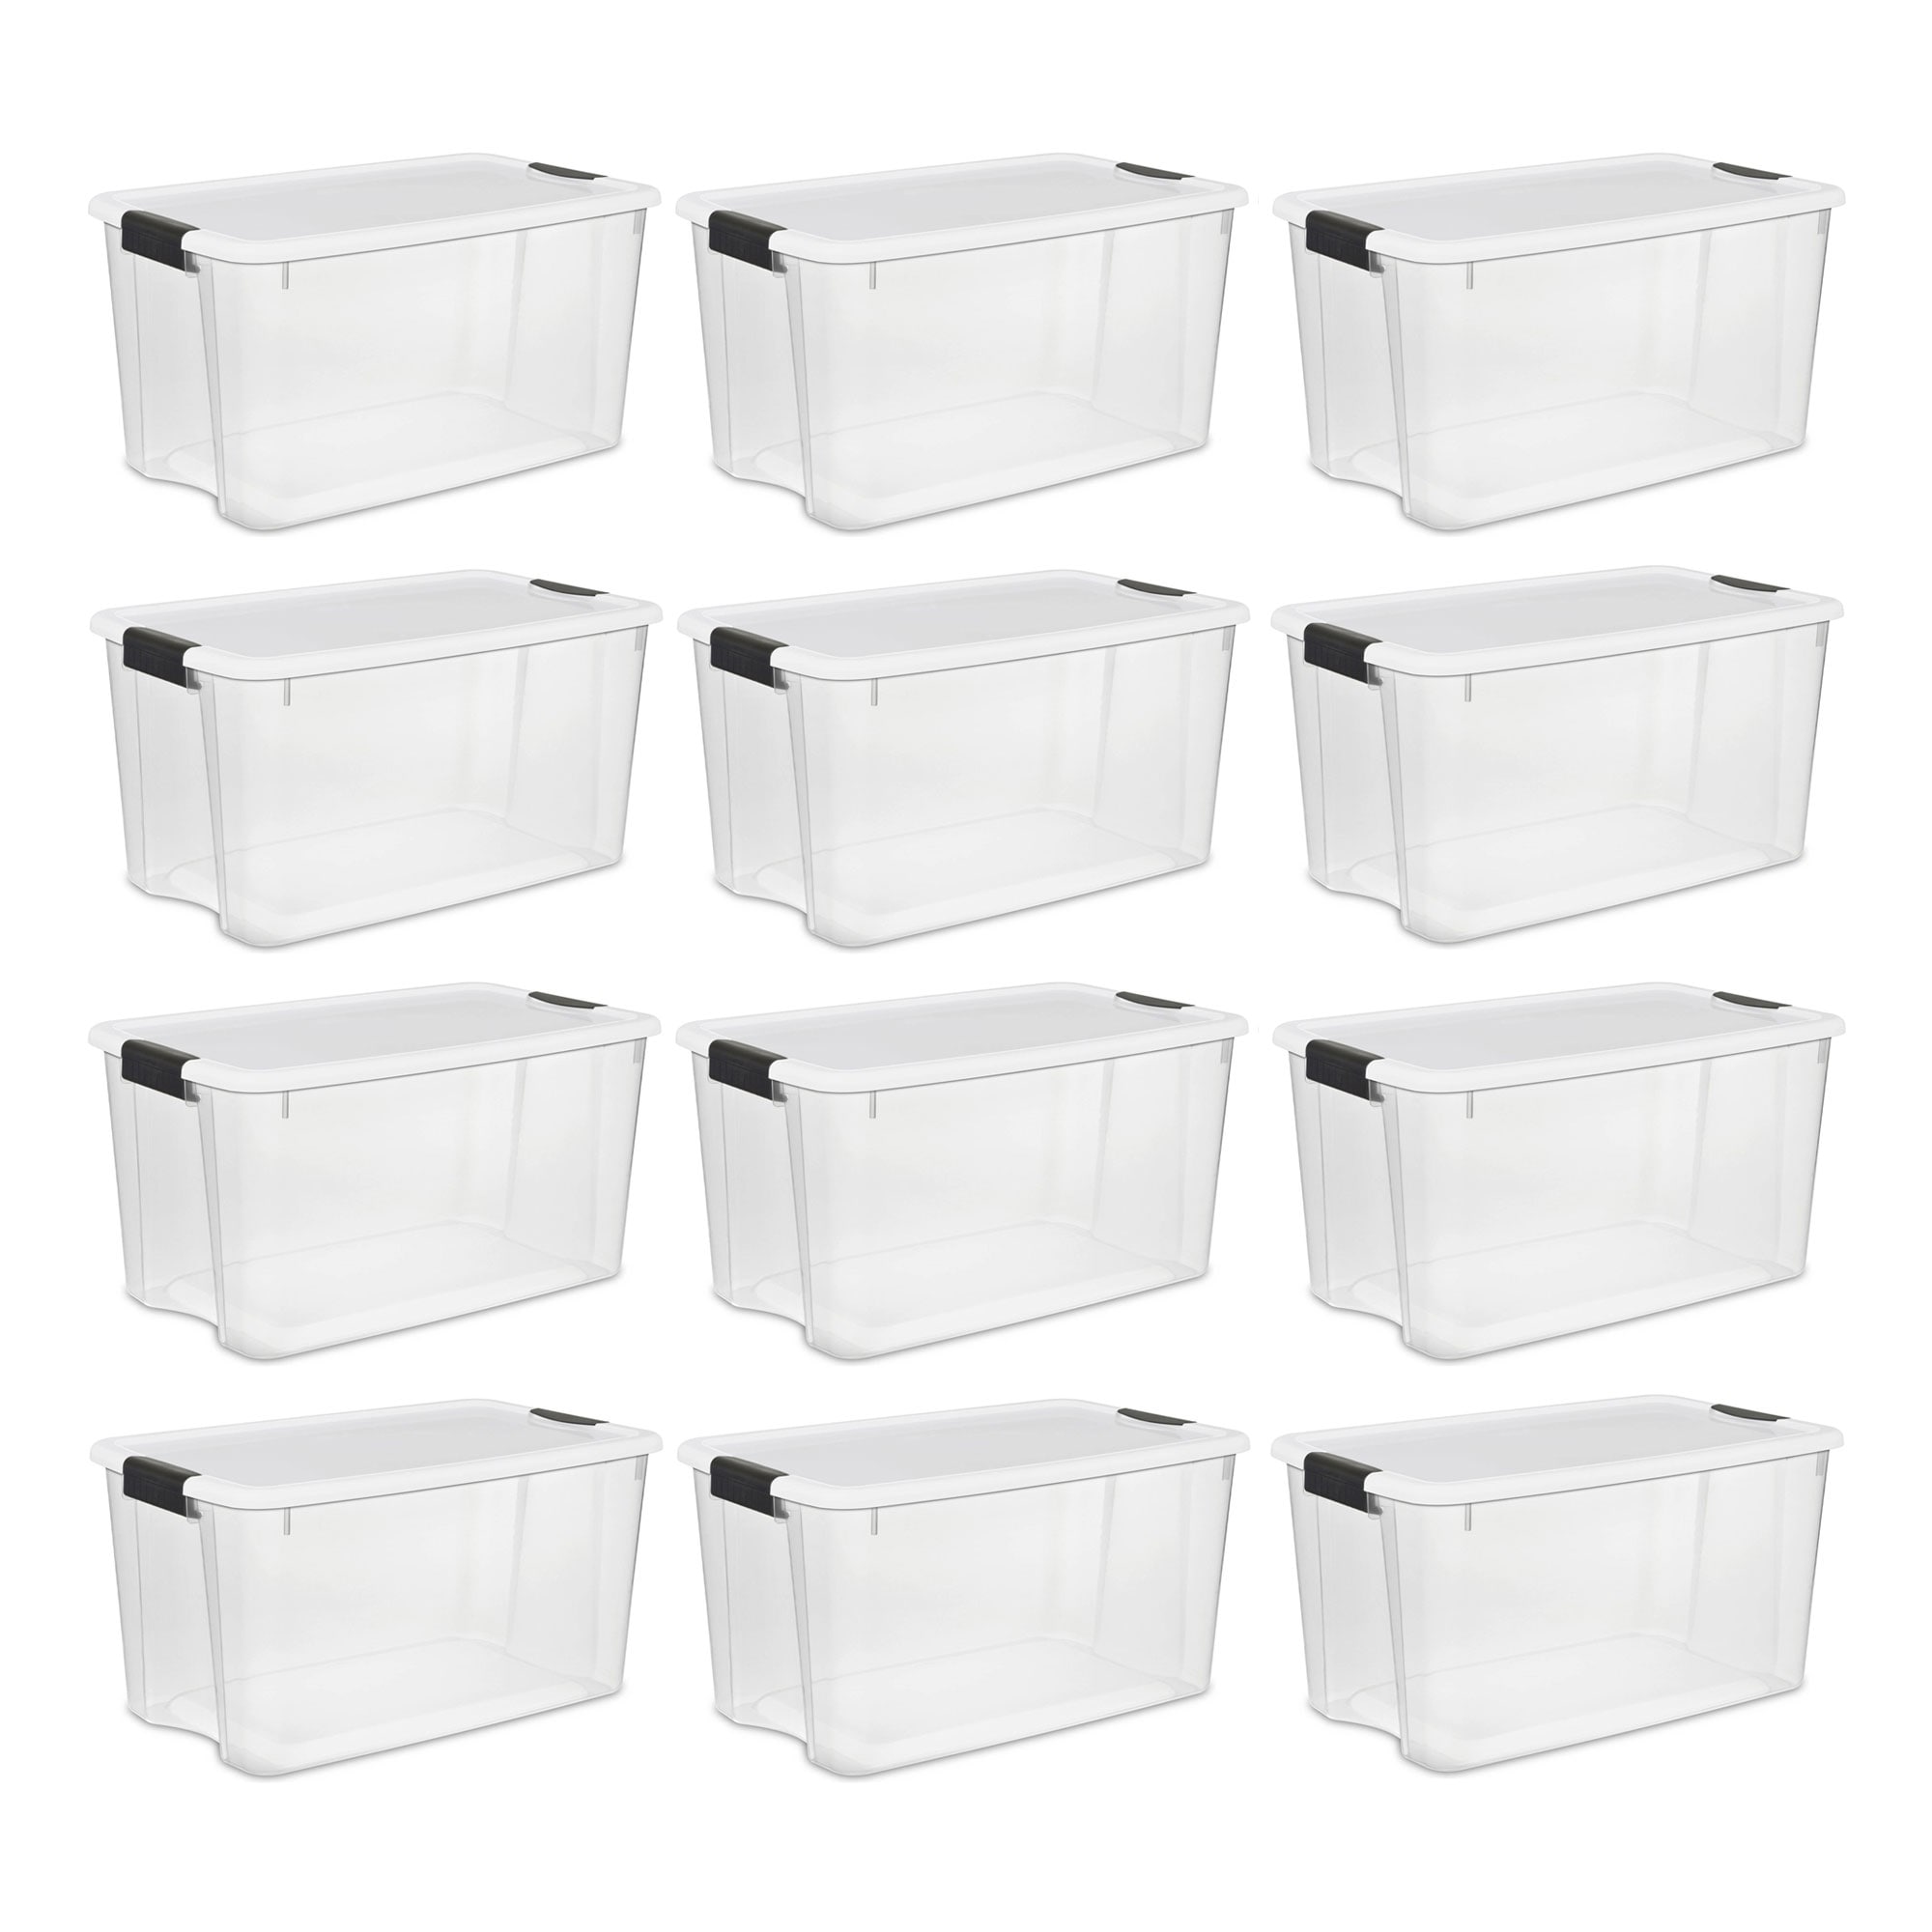 https://ak1.ostkcdn.com/images/products/is/images/direct/b6229e293a837beae441ef201ffd4678cb74cb50/Sterilite-70-Qt-Clear-Plastic-Stackable-Storage-Bin-with-Latching-Lid%2C-%284-Pack%29.jpg